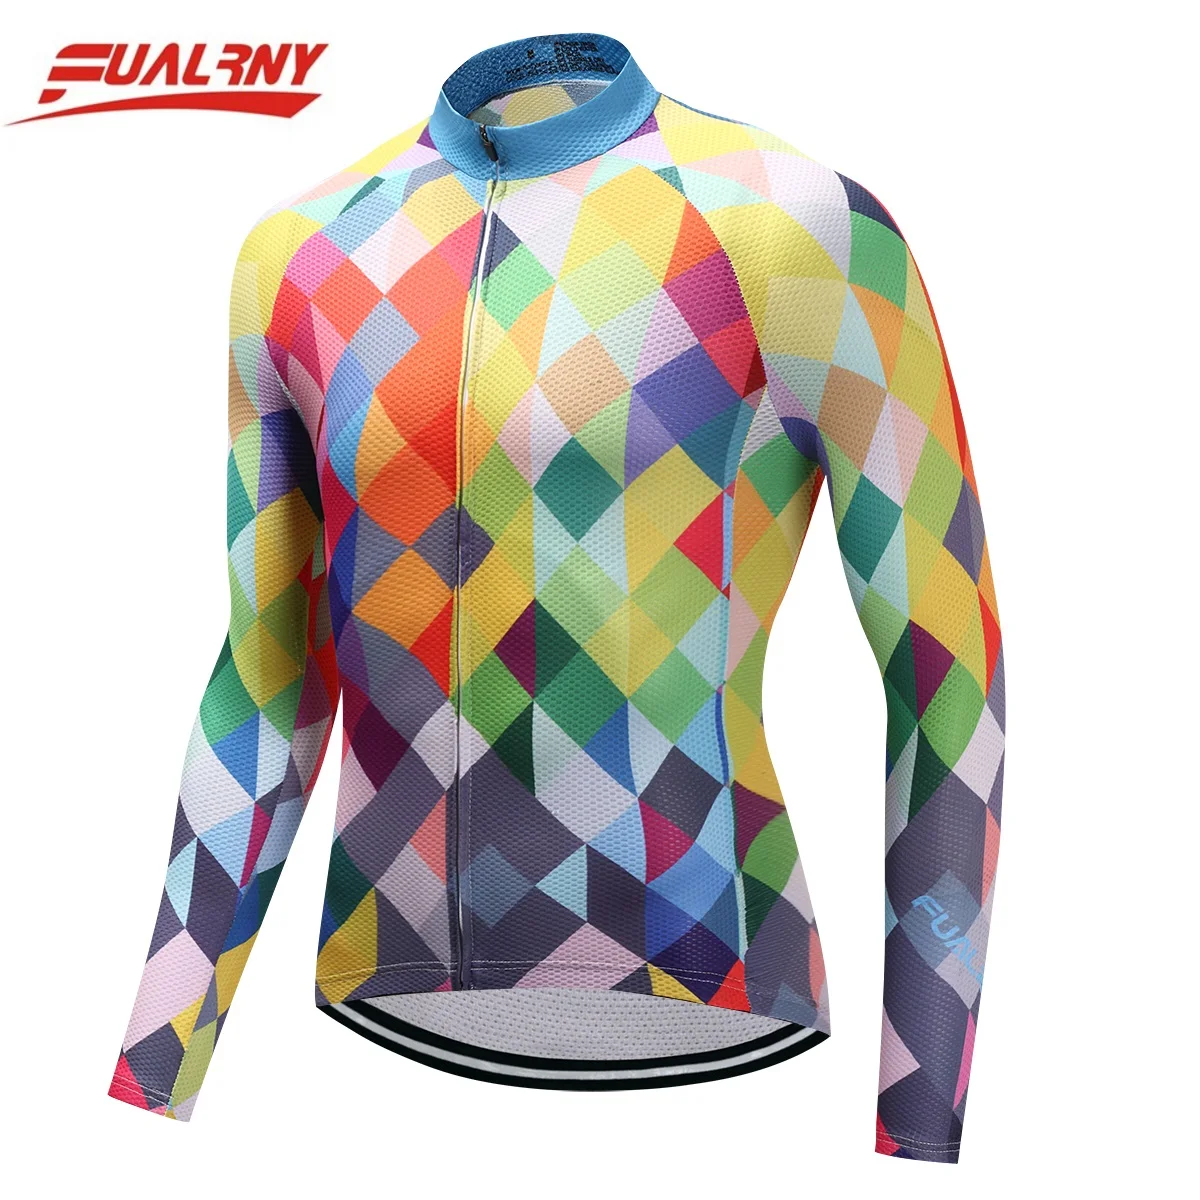 

2018 FUALRNY Long sleeve Ropa Ciclismo Cycling Jersey 100% Polyester/Autumn Mountian Bicycle Clothing/MTB Bike Clothes colourful